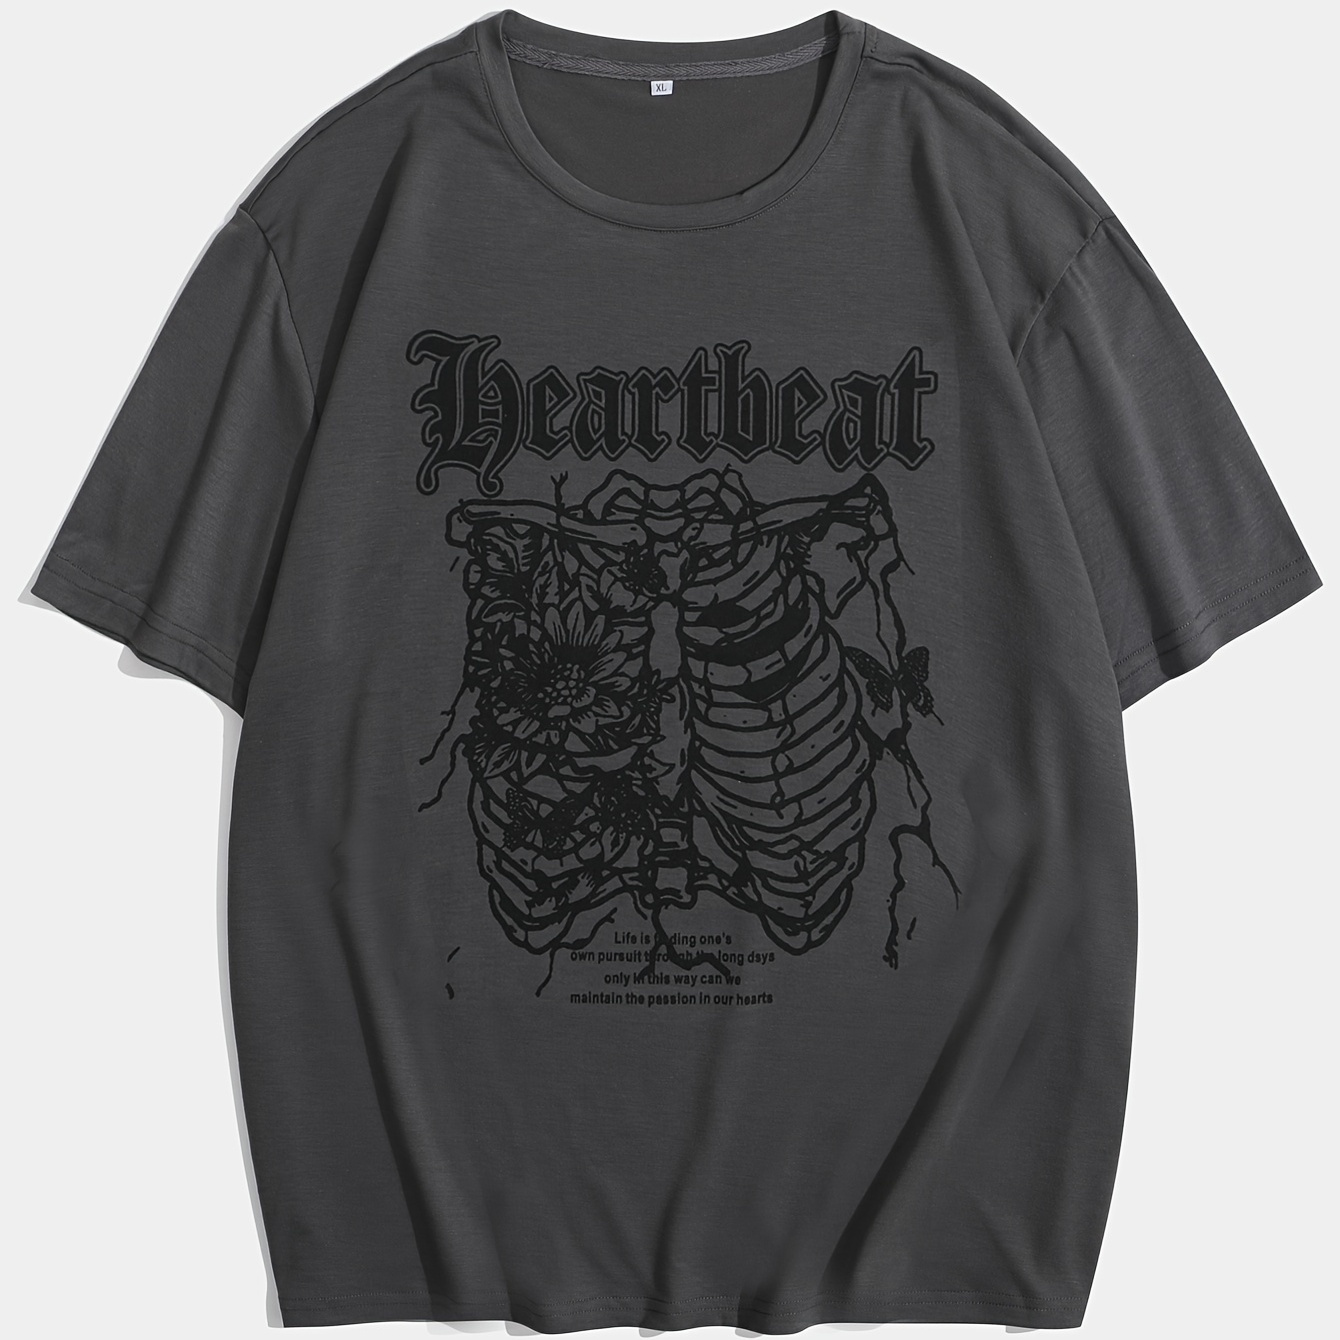 

Skeleton And Floral Sketch Pattern And Alphabet "heartbeat" T-shirt With Crew Neck And Short Sleeve, Novel And Chic Tops For Men's Summer Leisurewear